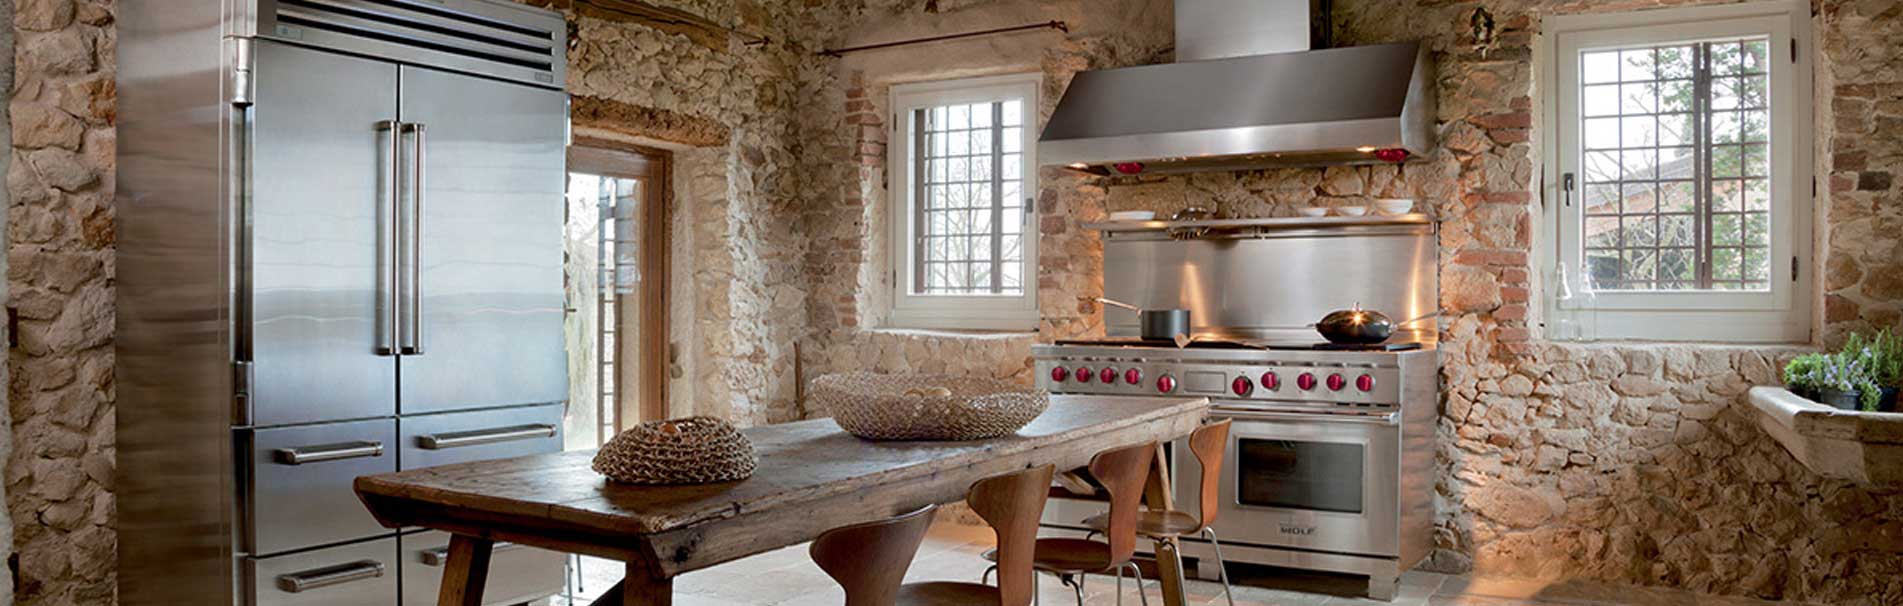 Kitchen with stone walls